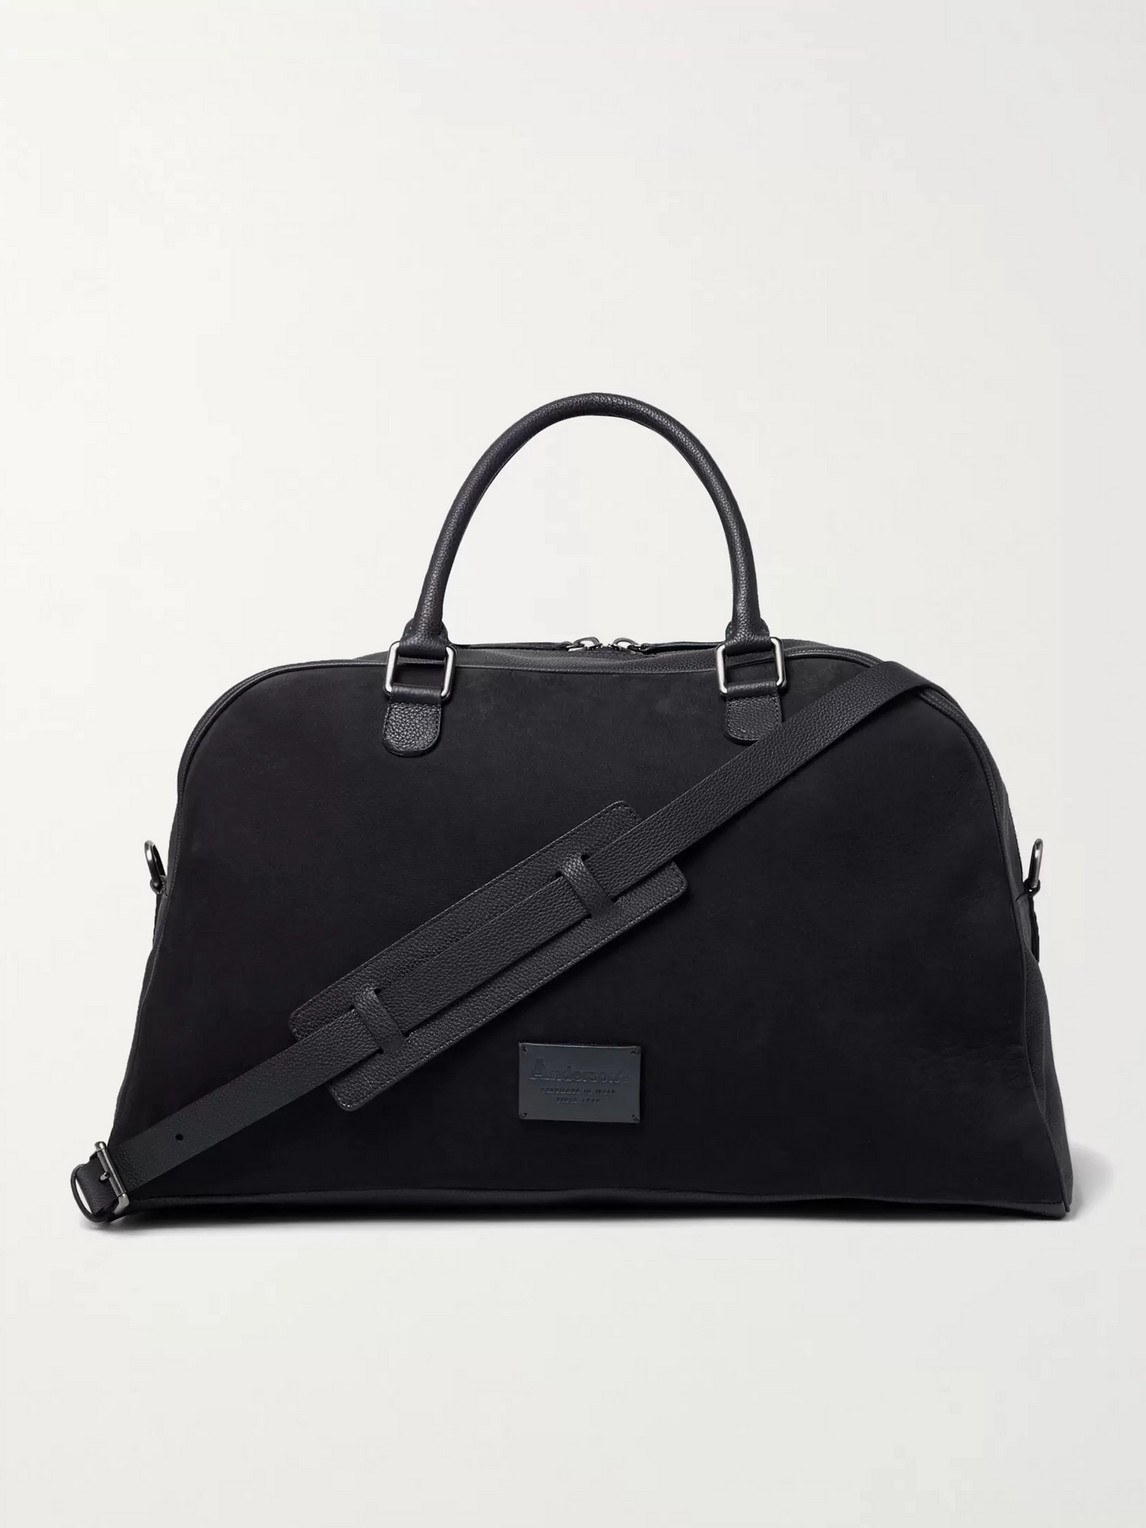 ANDERSON'S FULL-GRAIN LEATHER AND NUBUCK HOLDALL